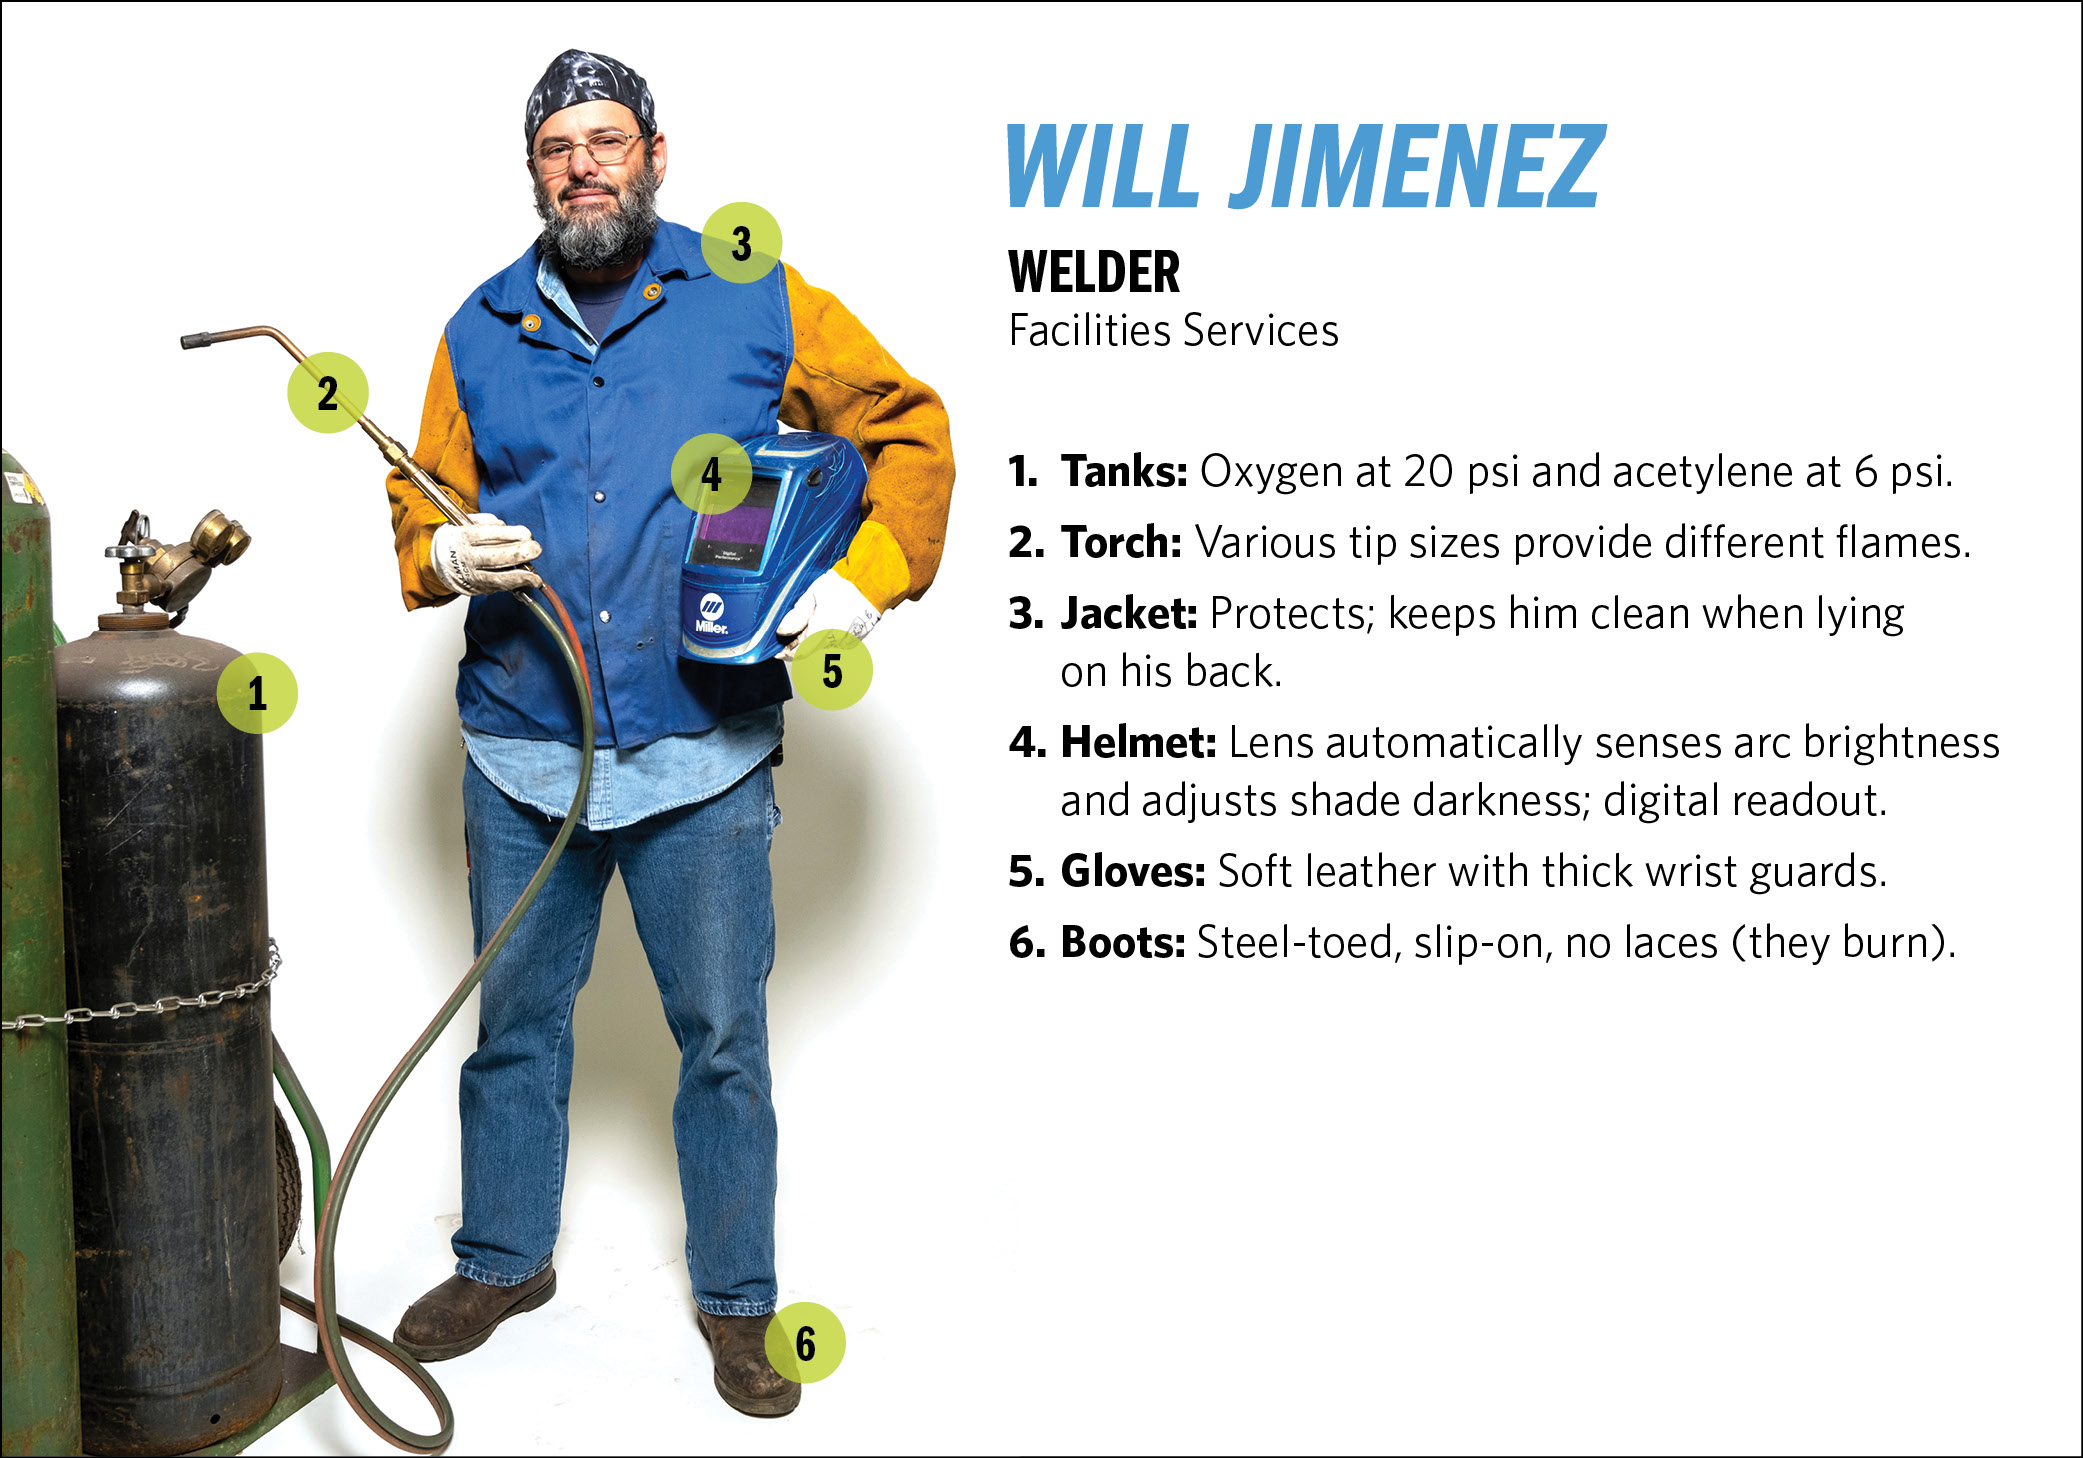 Welder Will Jimenez. Steel-toe boots, no laces as they burn; oxygen and acetylene tanks; helmet with light-sensitive lens; thick-wristed gloves; jacket, torch.